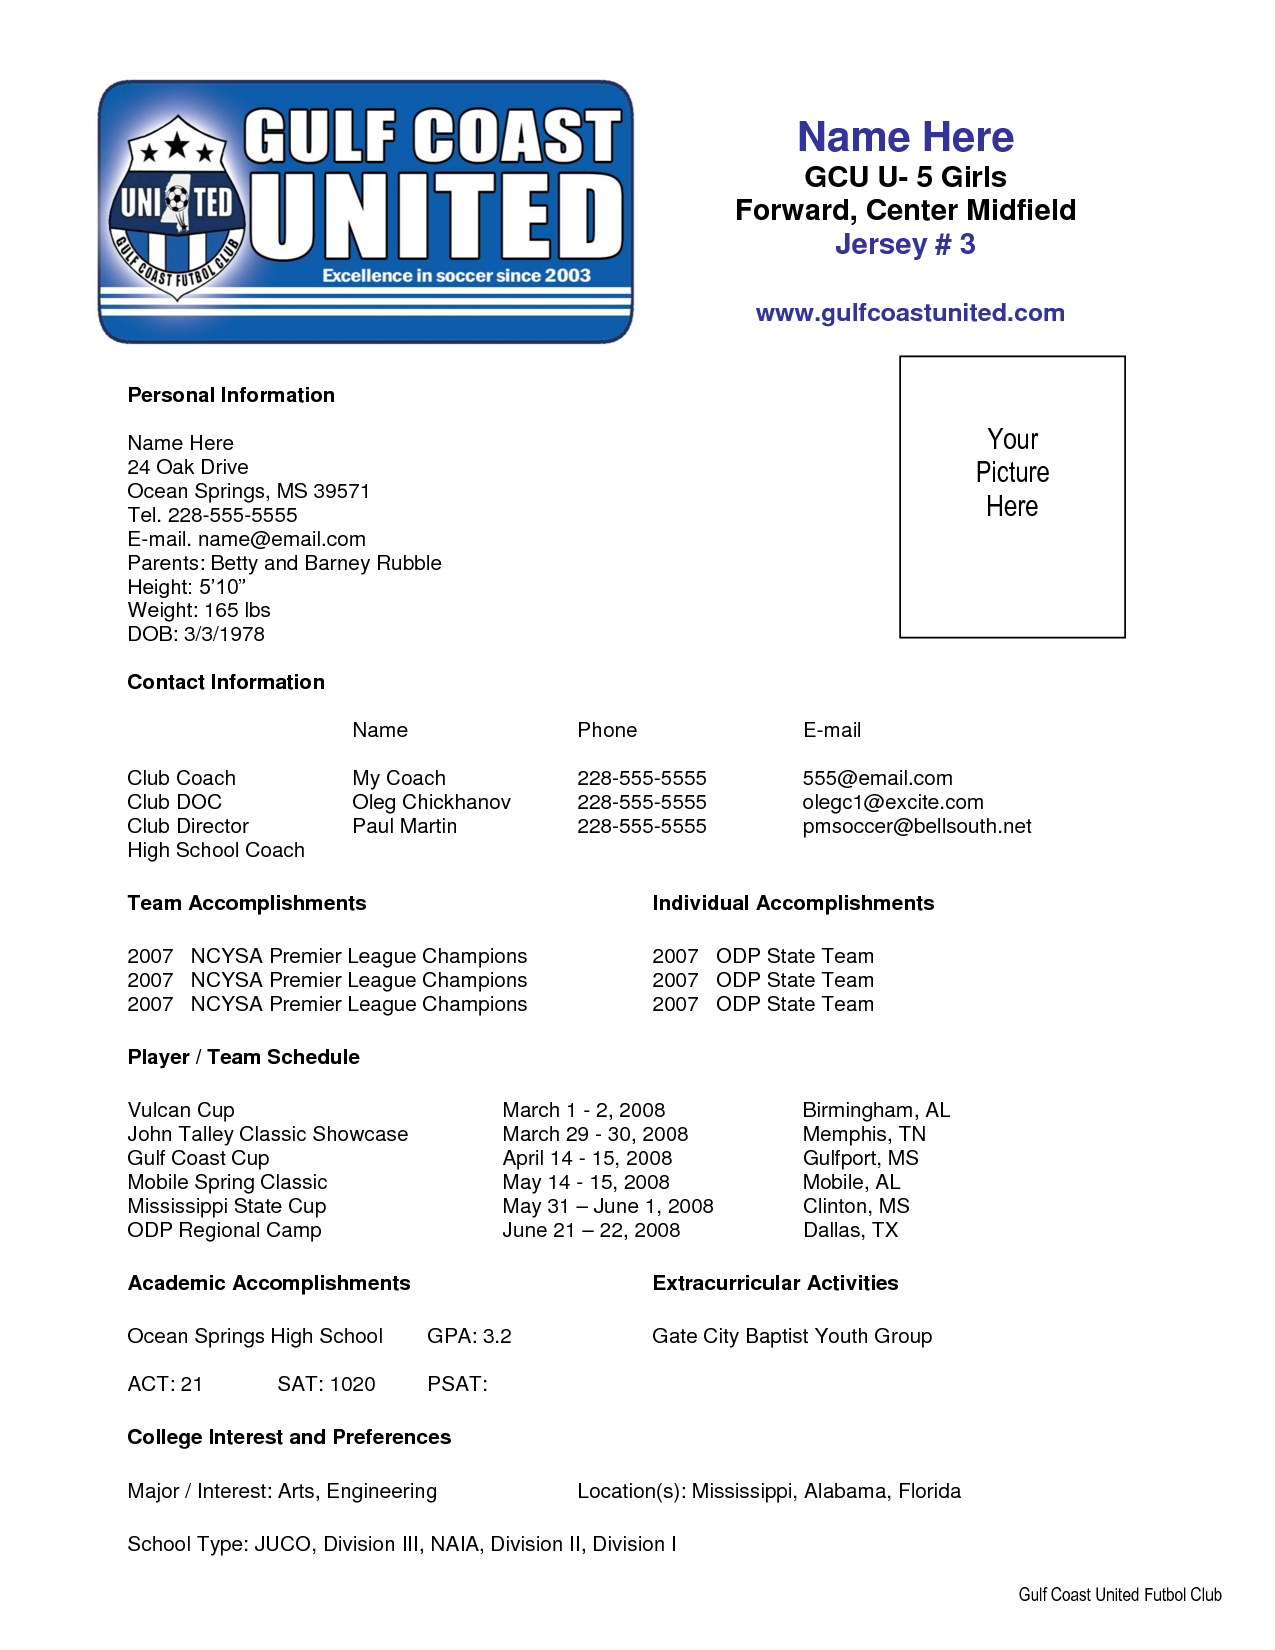 Sample Soccer Resume Coaching Business Best Resume Template for size 1275 X 1650